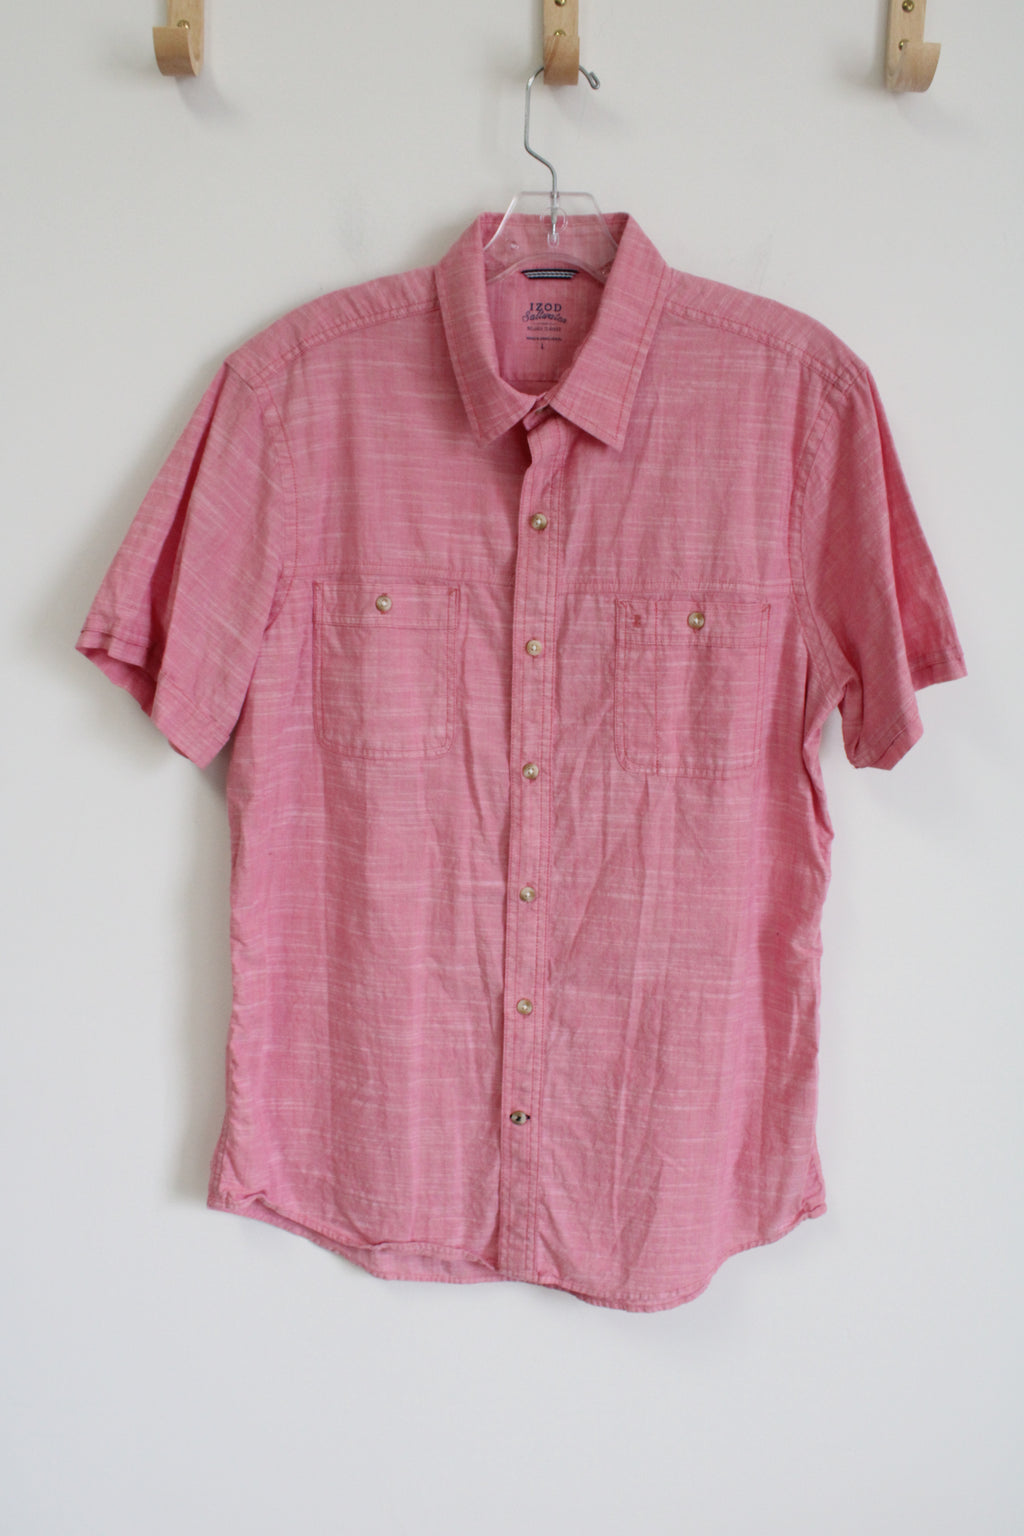 Izod Saltwater Relaxed Classics Pink Button Down Shirt | L